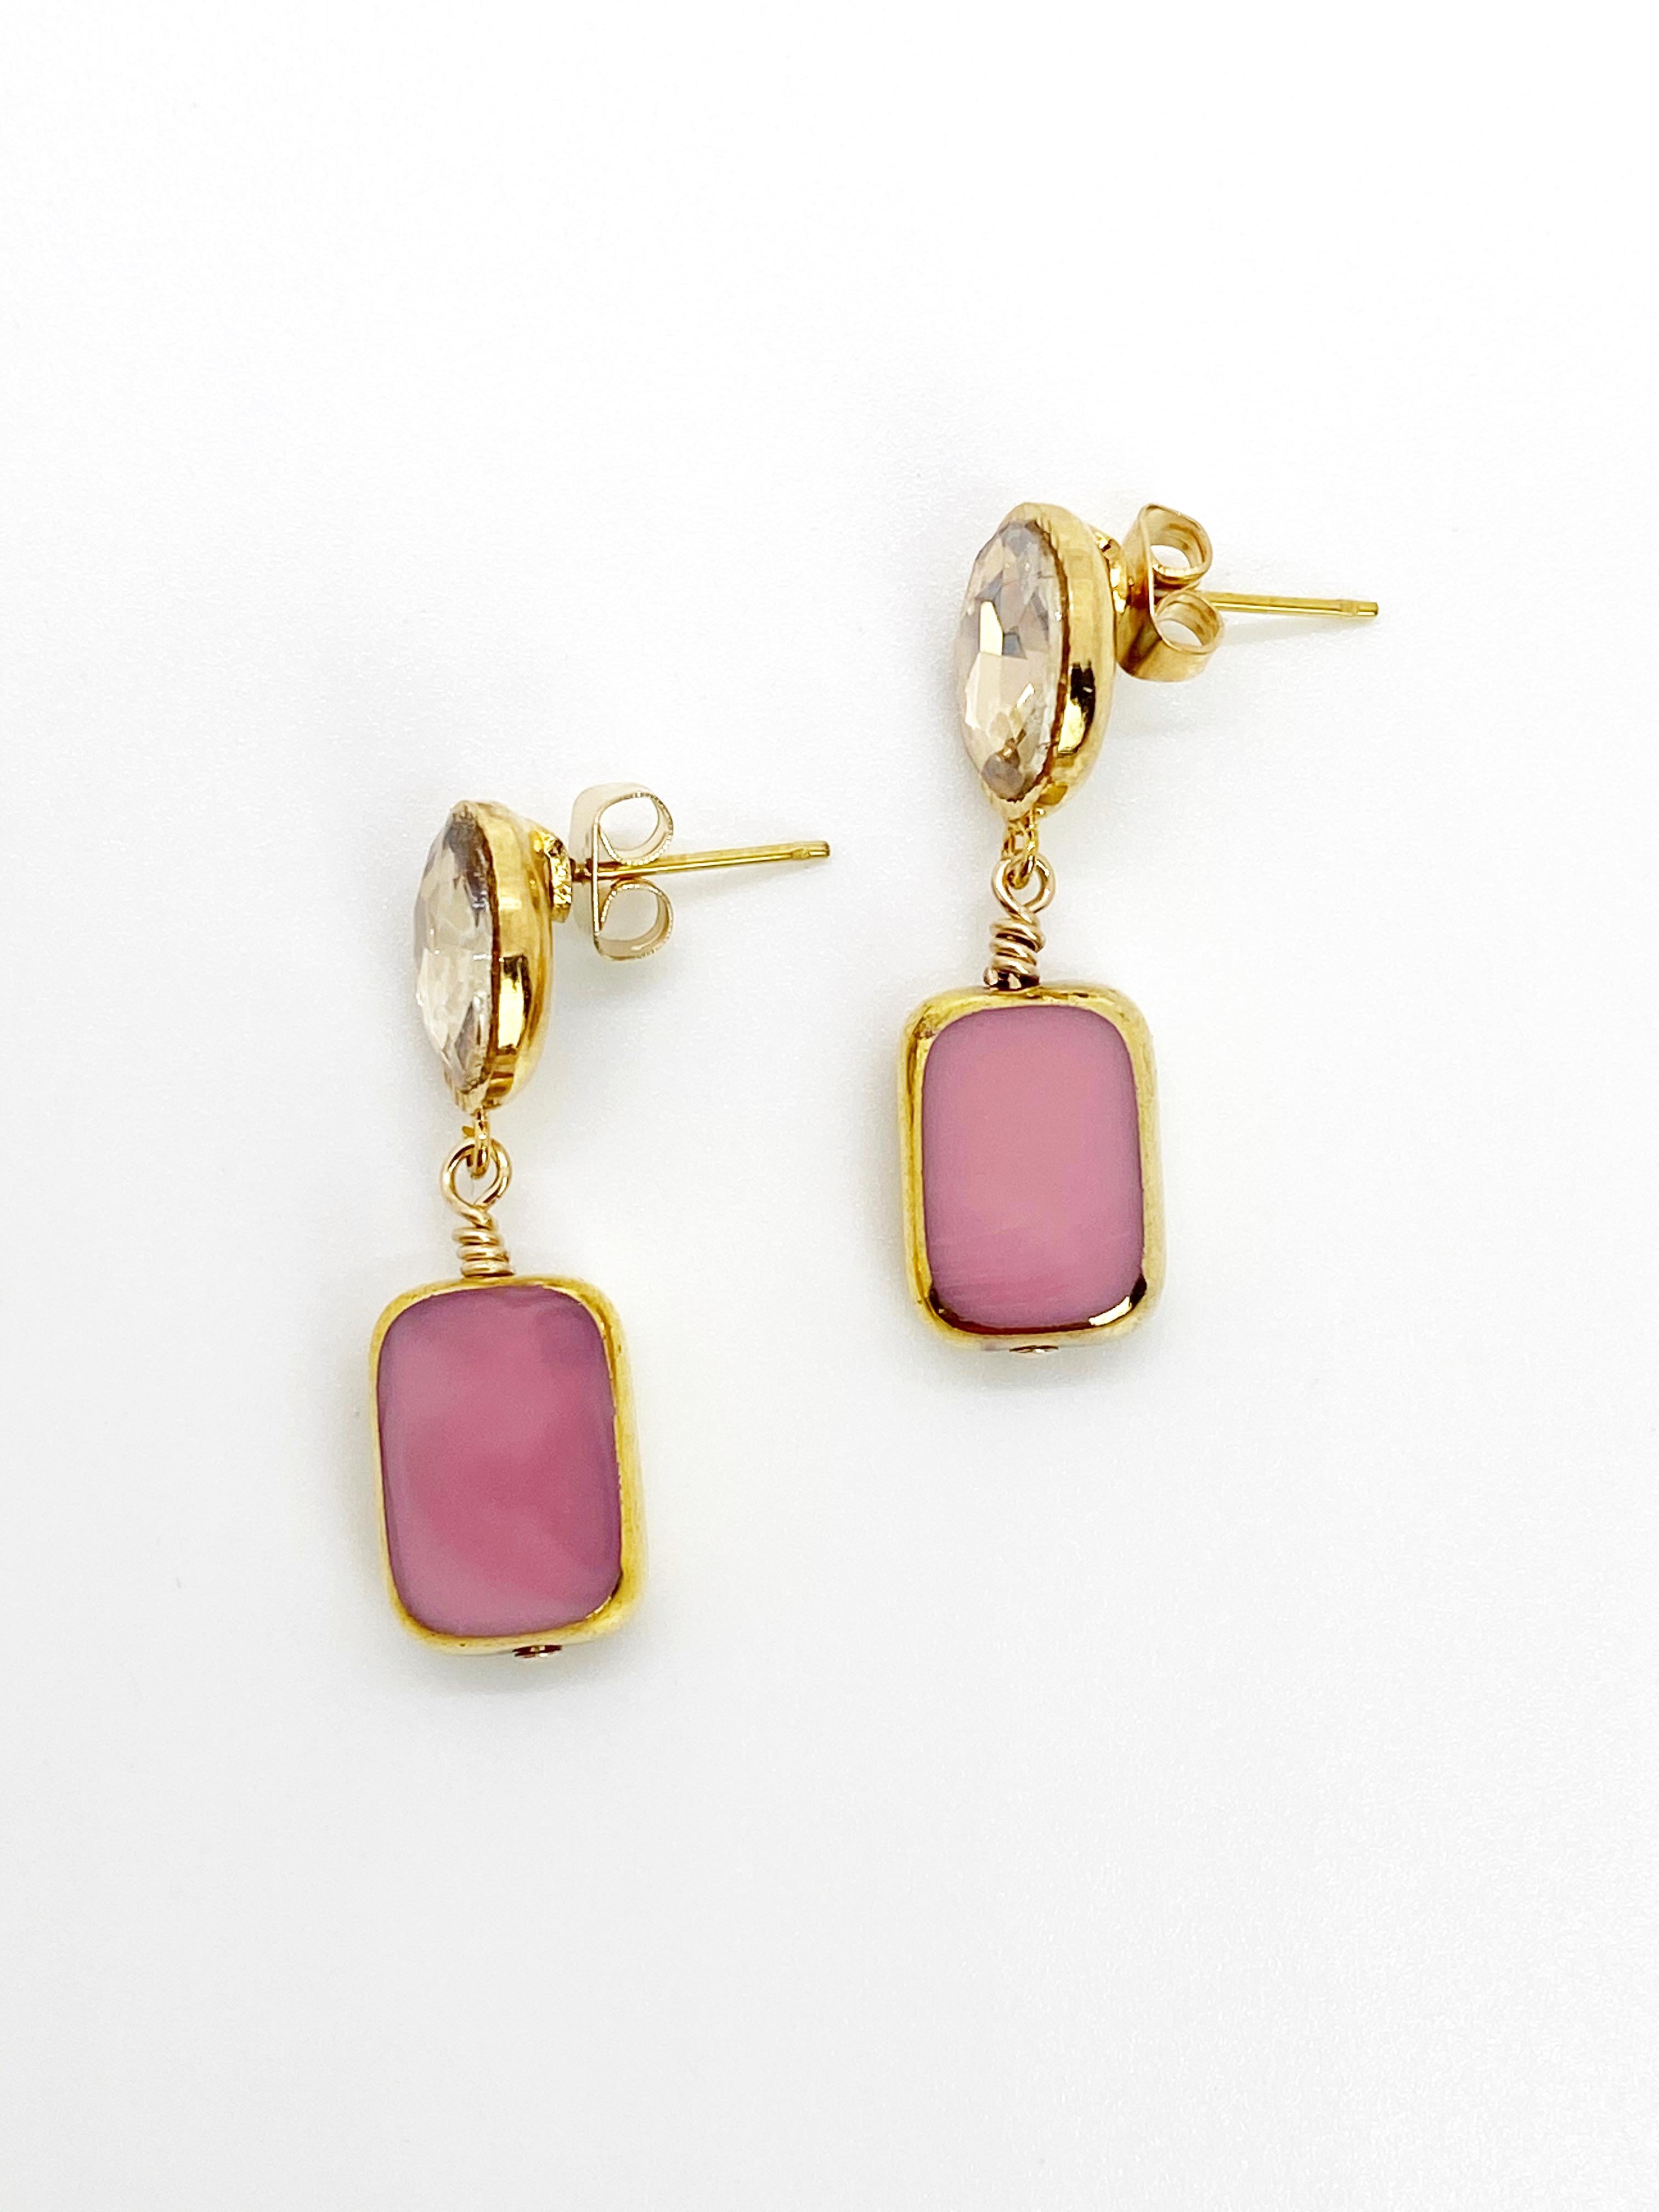 A pastel opaque pink German glass beads edged with 24K gold dangles on a 24K gold plated setting with a champagne cabochon.

The German vintage glass beads are considered rare and collectible, circa 1920s-1960s.

*Our jewelry have maximum protection